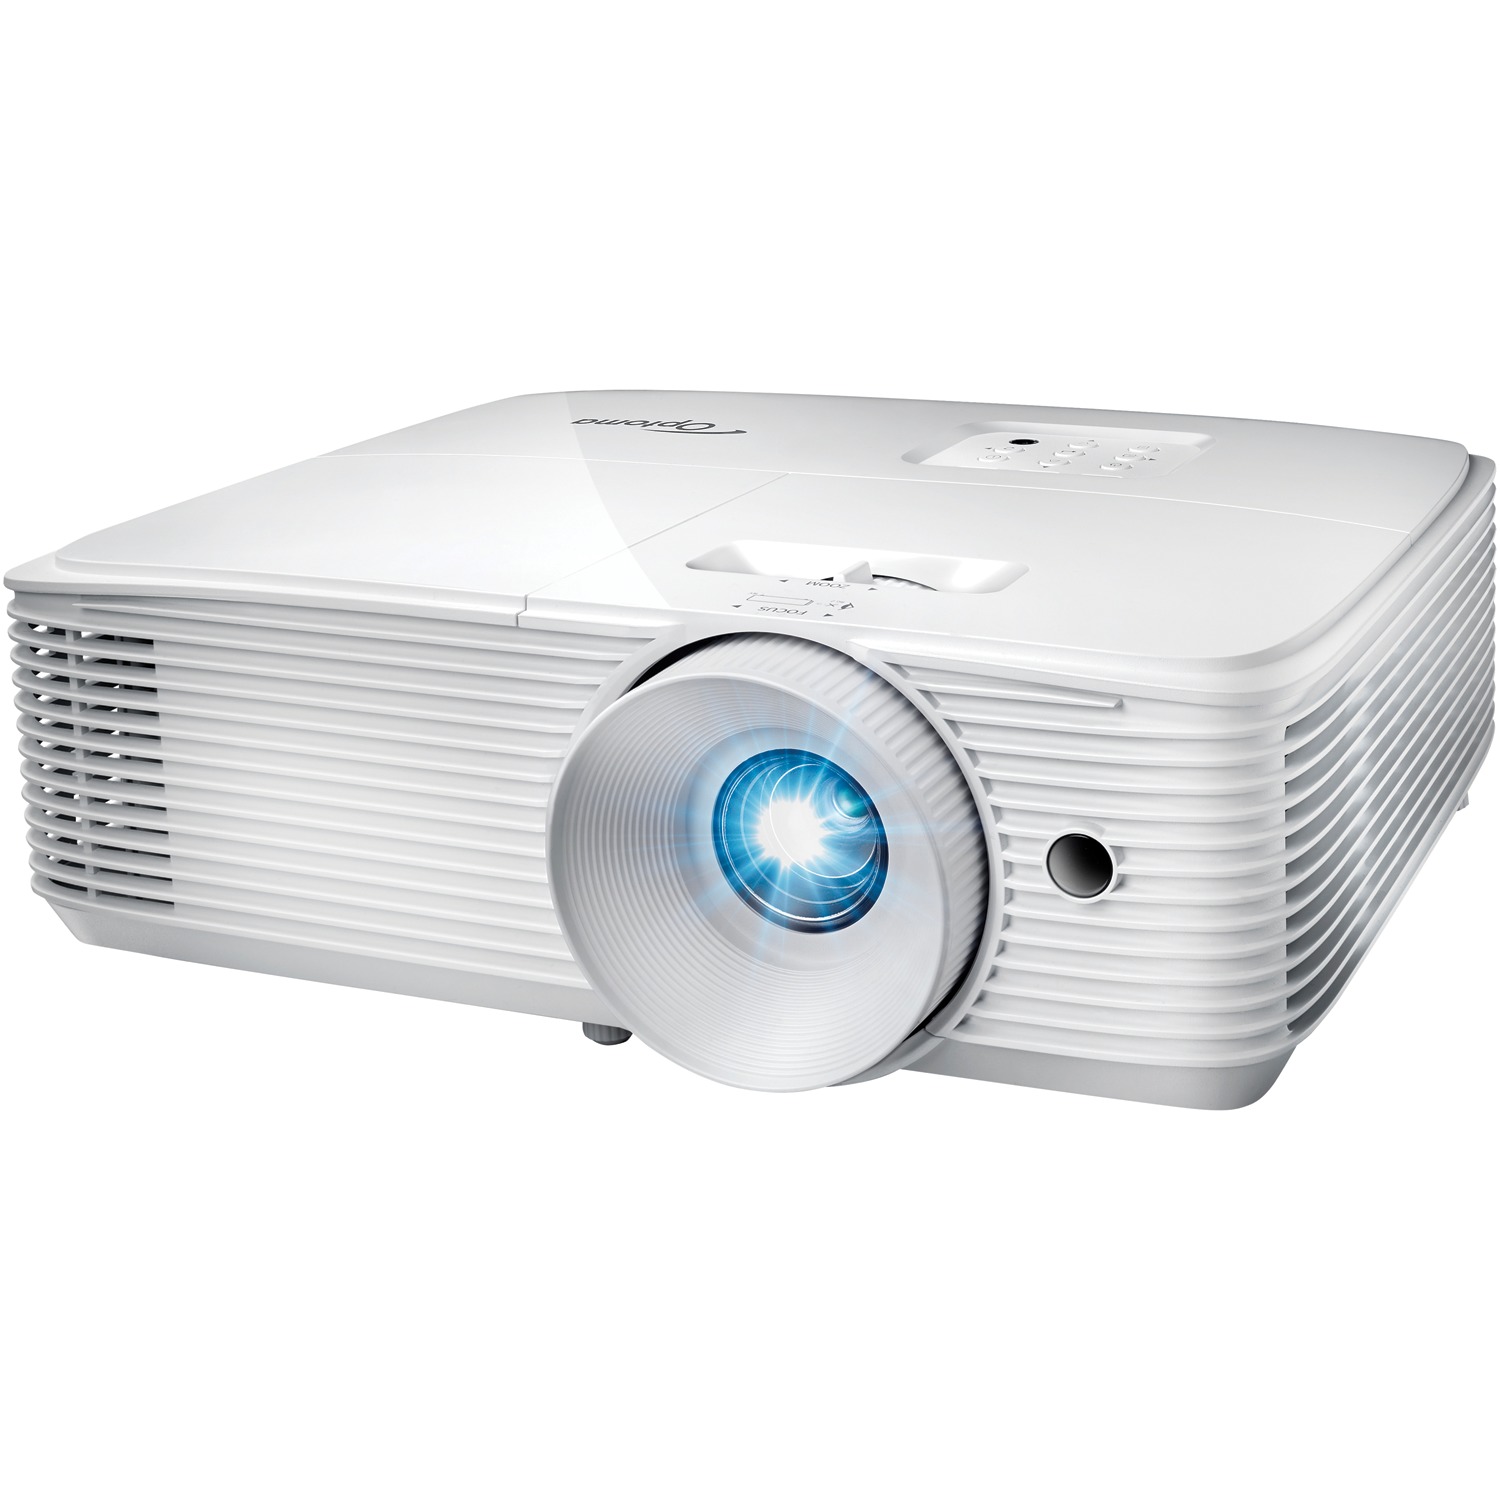 Optoma X343 3600 Lumens XGA DLP Projector with 15,000-hour Lamp Life - image 2 of 5